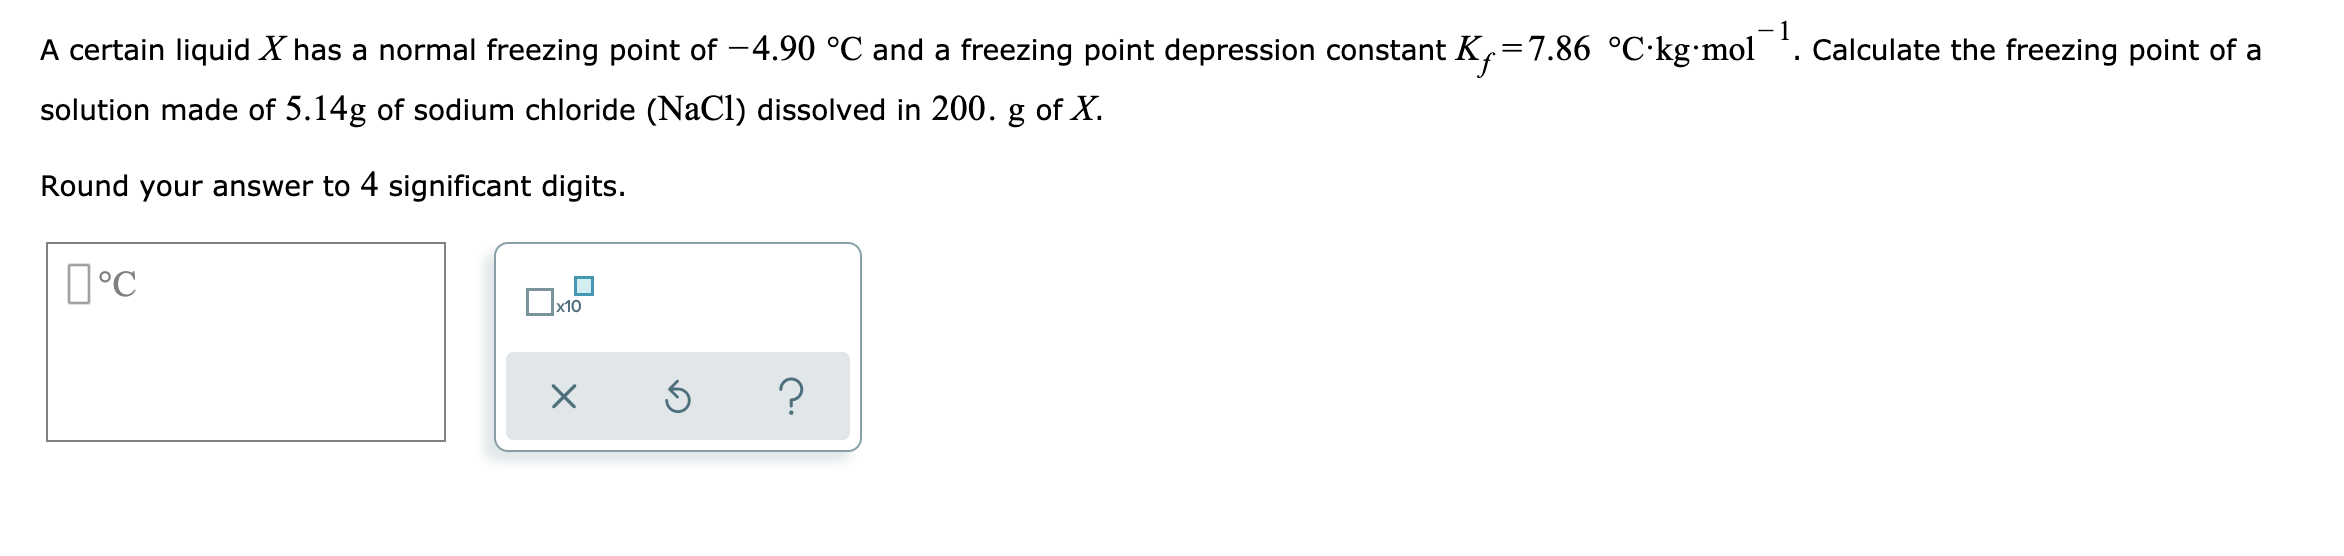 A certain liquid X has a normal freezing point of -4.90 °C and a freezing point depression constant K,=7.86 °C·kg•mol *. Calculate the freezing point of a
solution made of 5.14g of sodium chloride (NaCl) dissolved in 200. g of X.
Round your answer to 4 significant digits.
D°C
